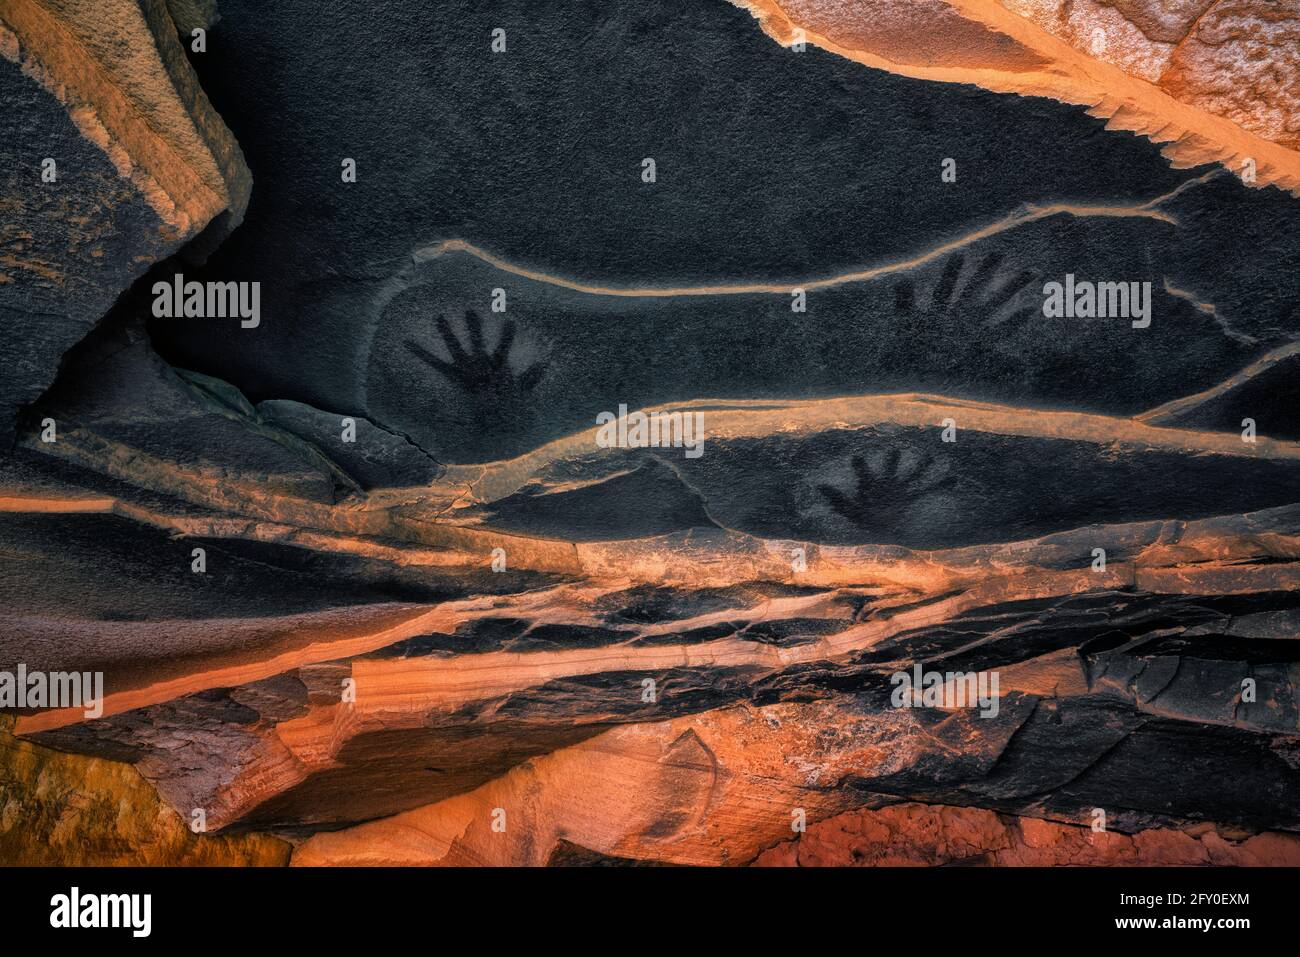 Ancient pictograph hand prints on the sandstone ceiling above the Anasazi Fallen Roof Ruin in SE Utah’s Cedar Mesa Plateau. Stock Photo